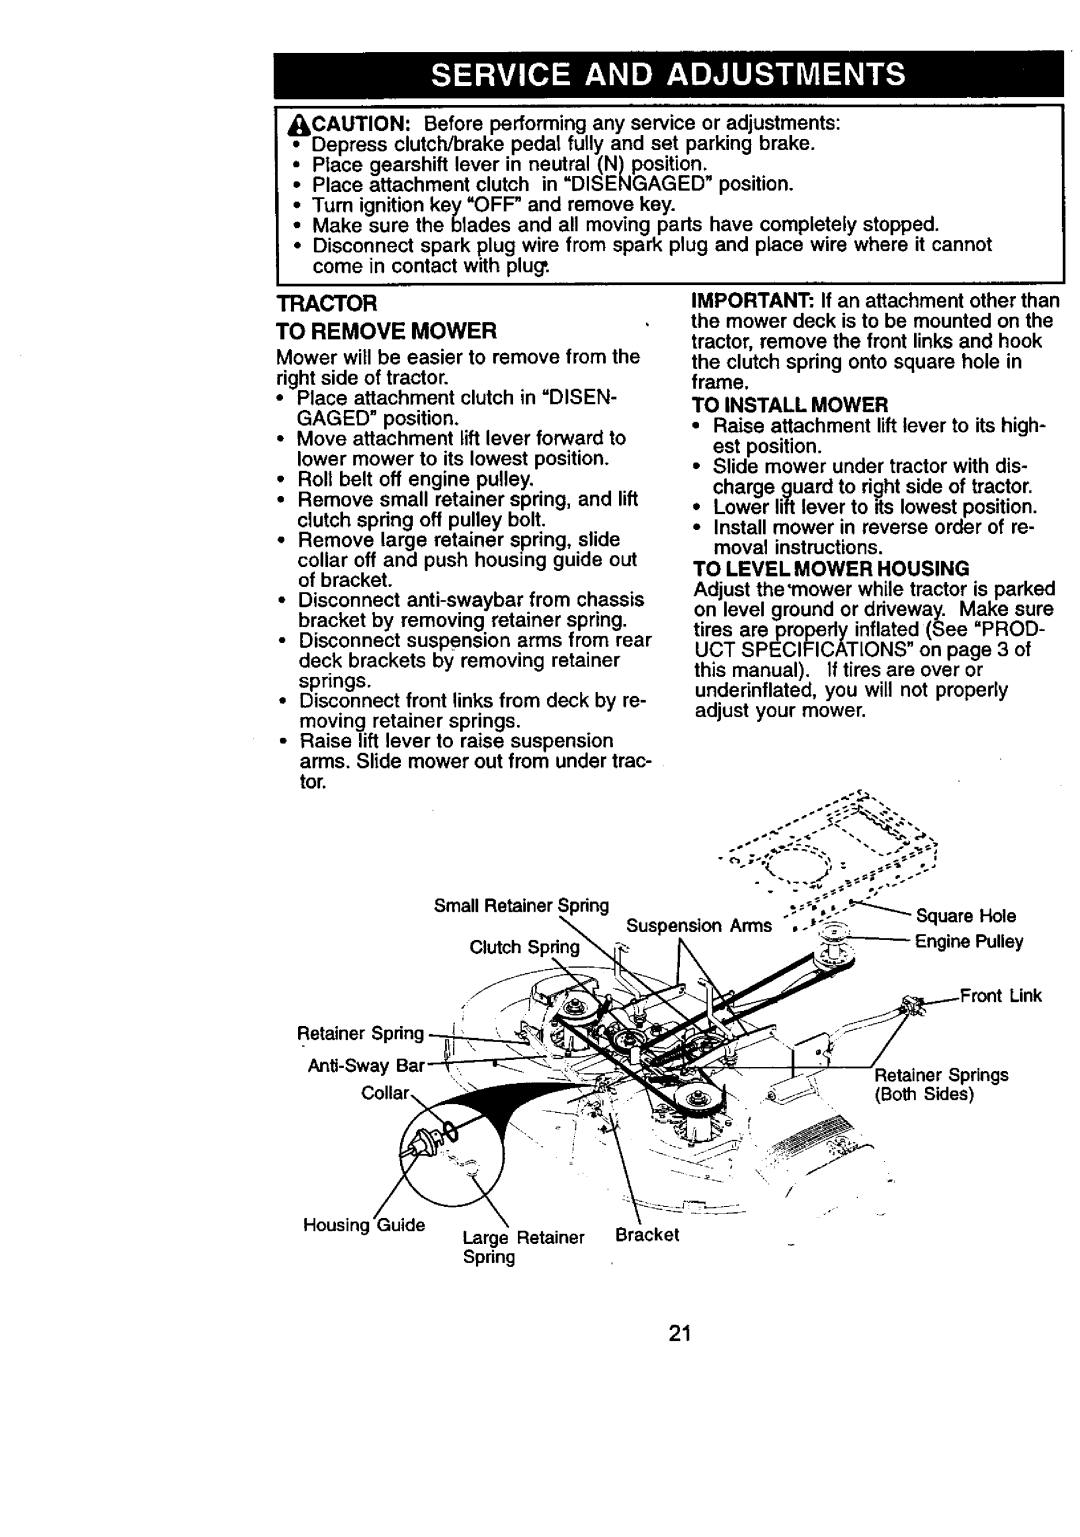 Craftsman 917.270831 owner manual Tractor, To Remove Mower, To Install Mower, To Level Mower Housing 